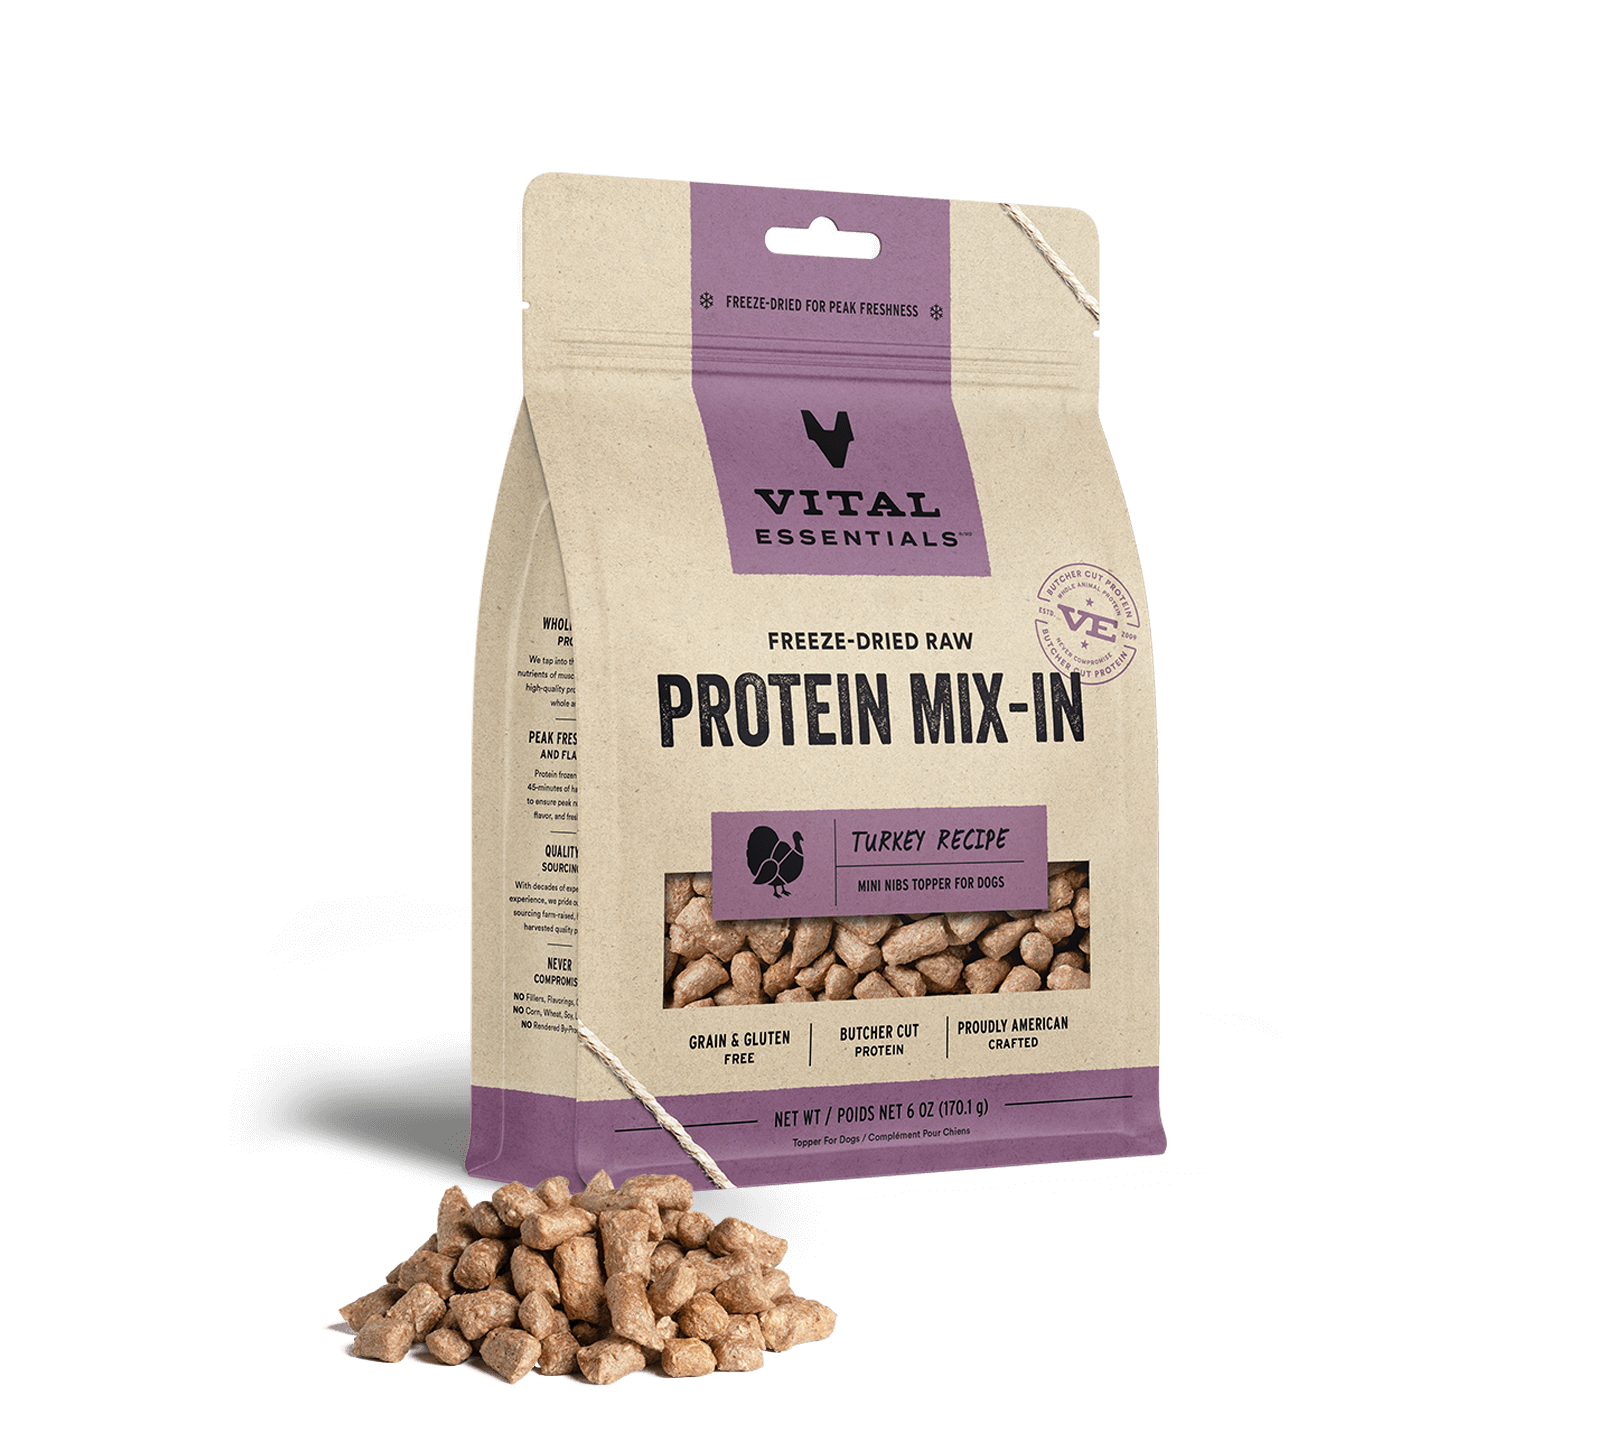 Vital Essentials Freeze-Dried Raw Protein Mix-In Turkey Recipe Mini Nibs Topper for Dogs, 6 oz - Health/First Aid